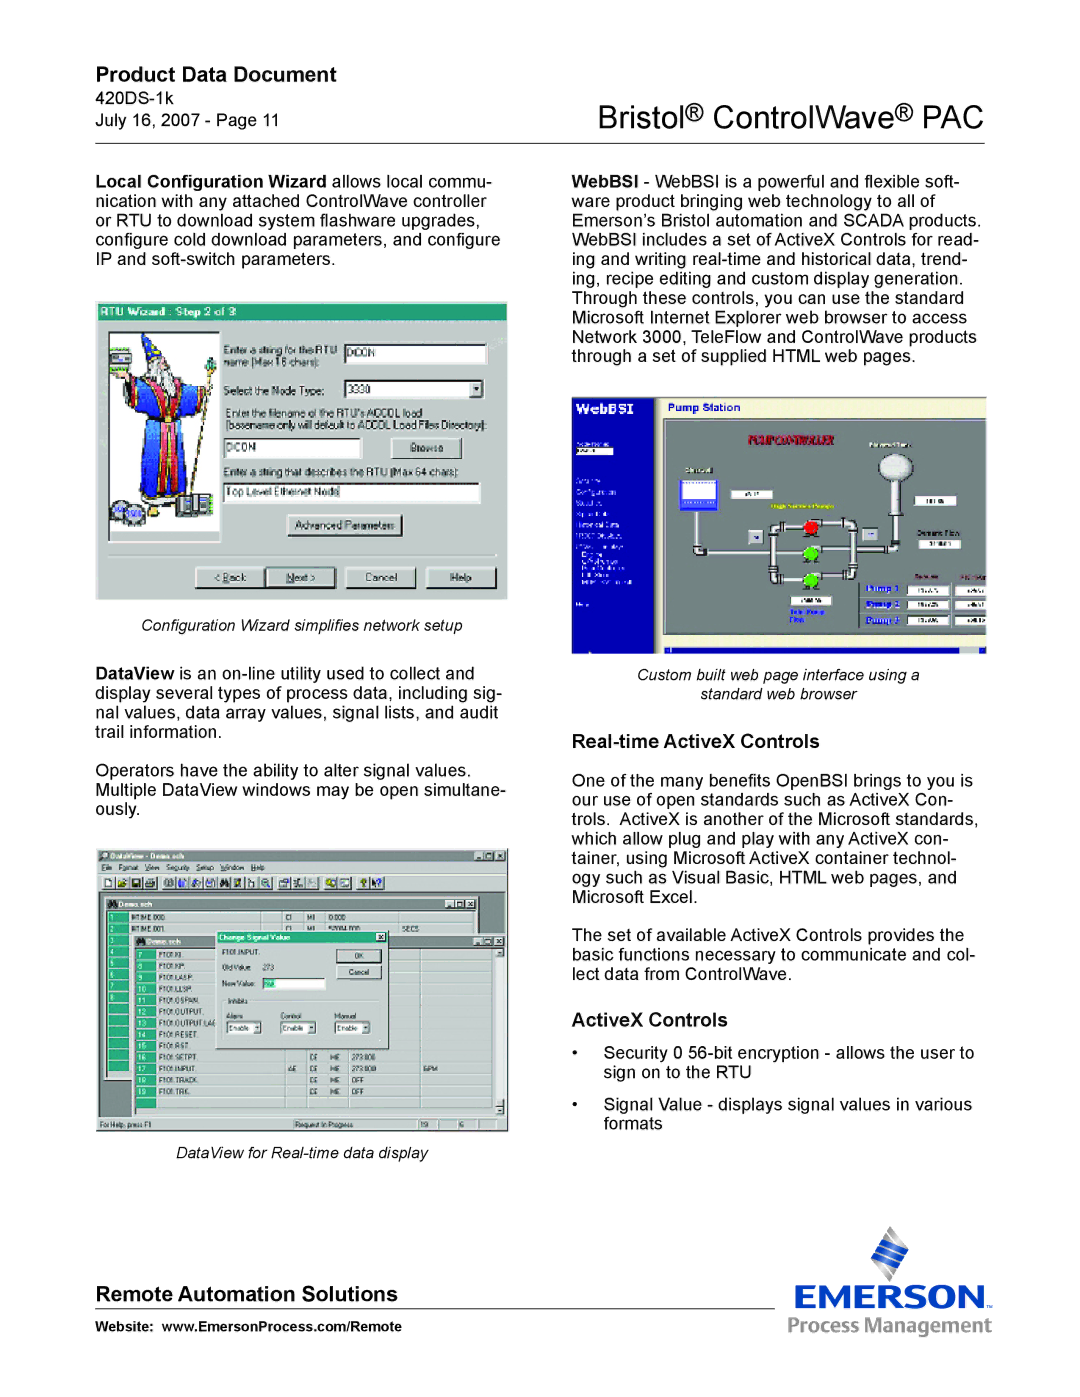 Emerson Process Management PAC manual Real-time ActiveX Controls 